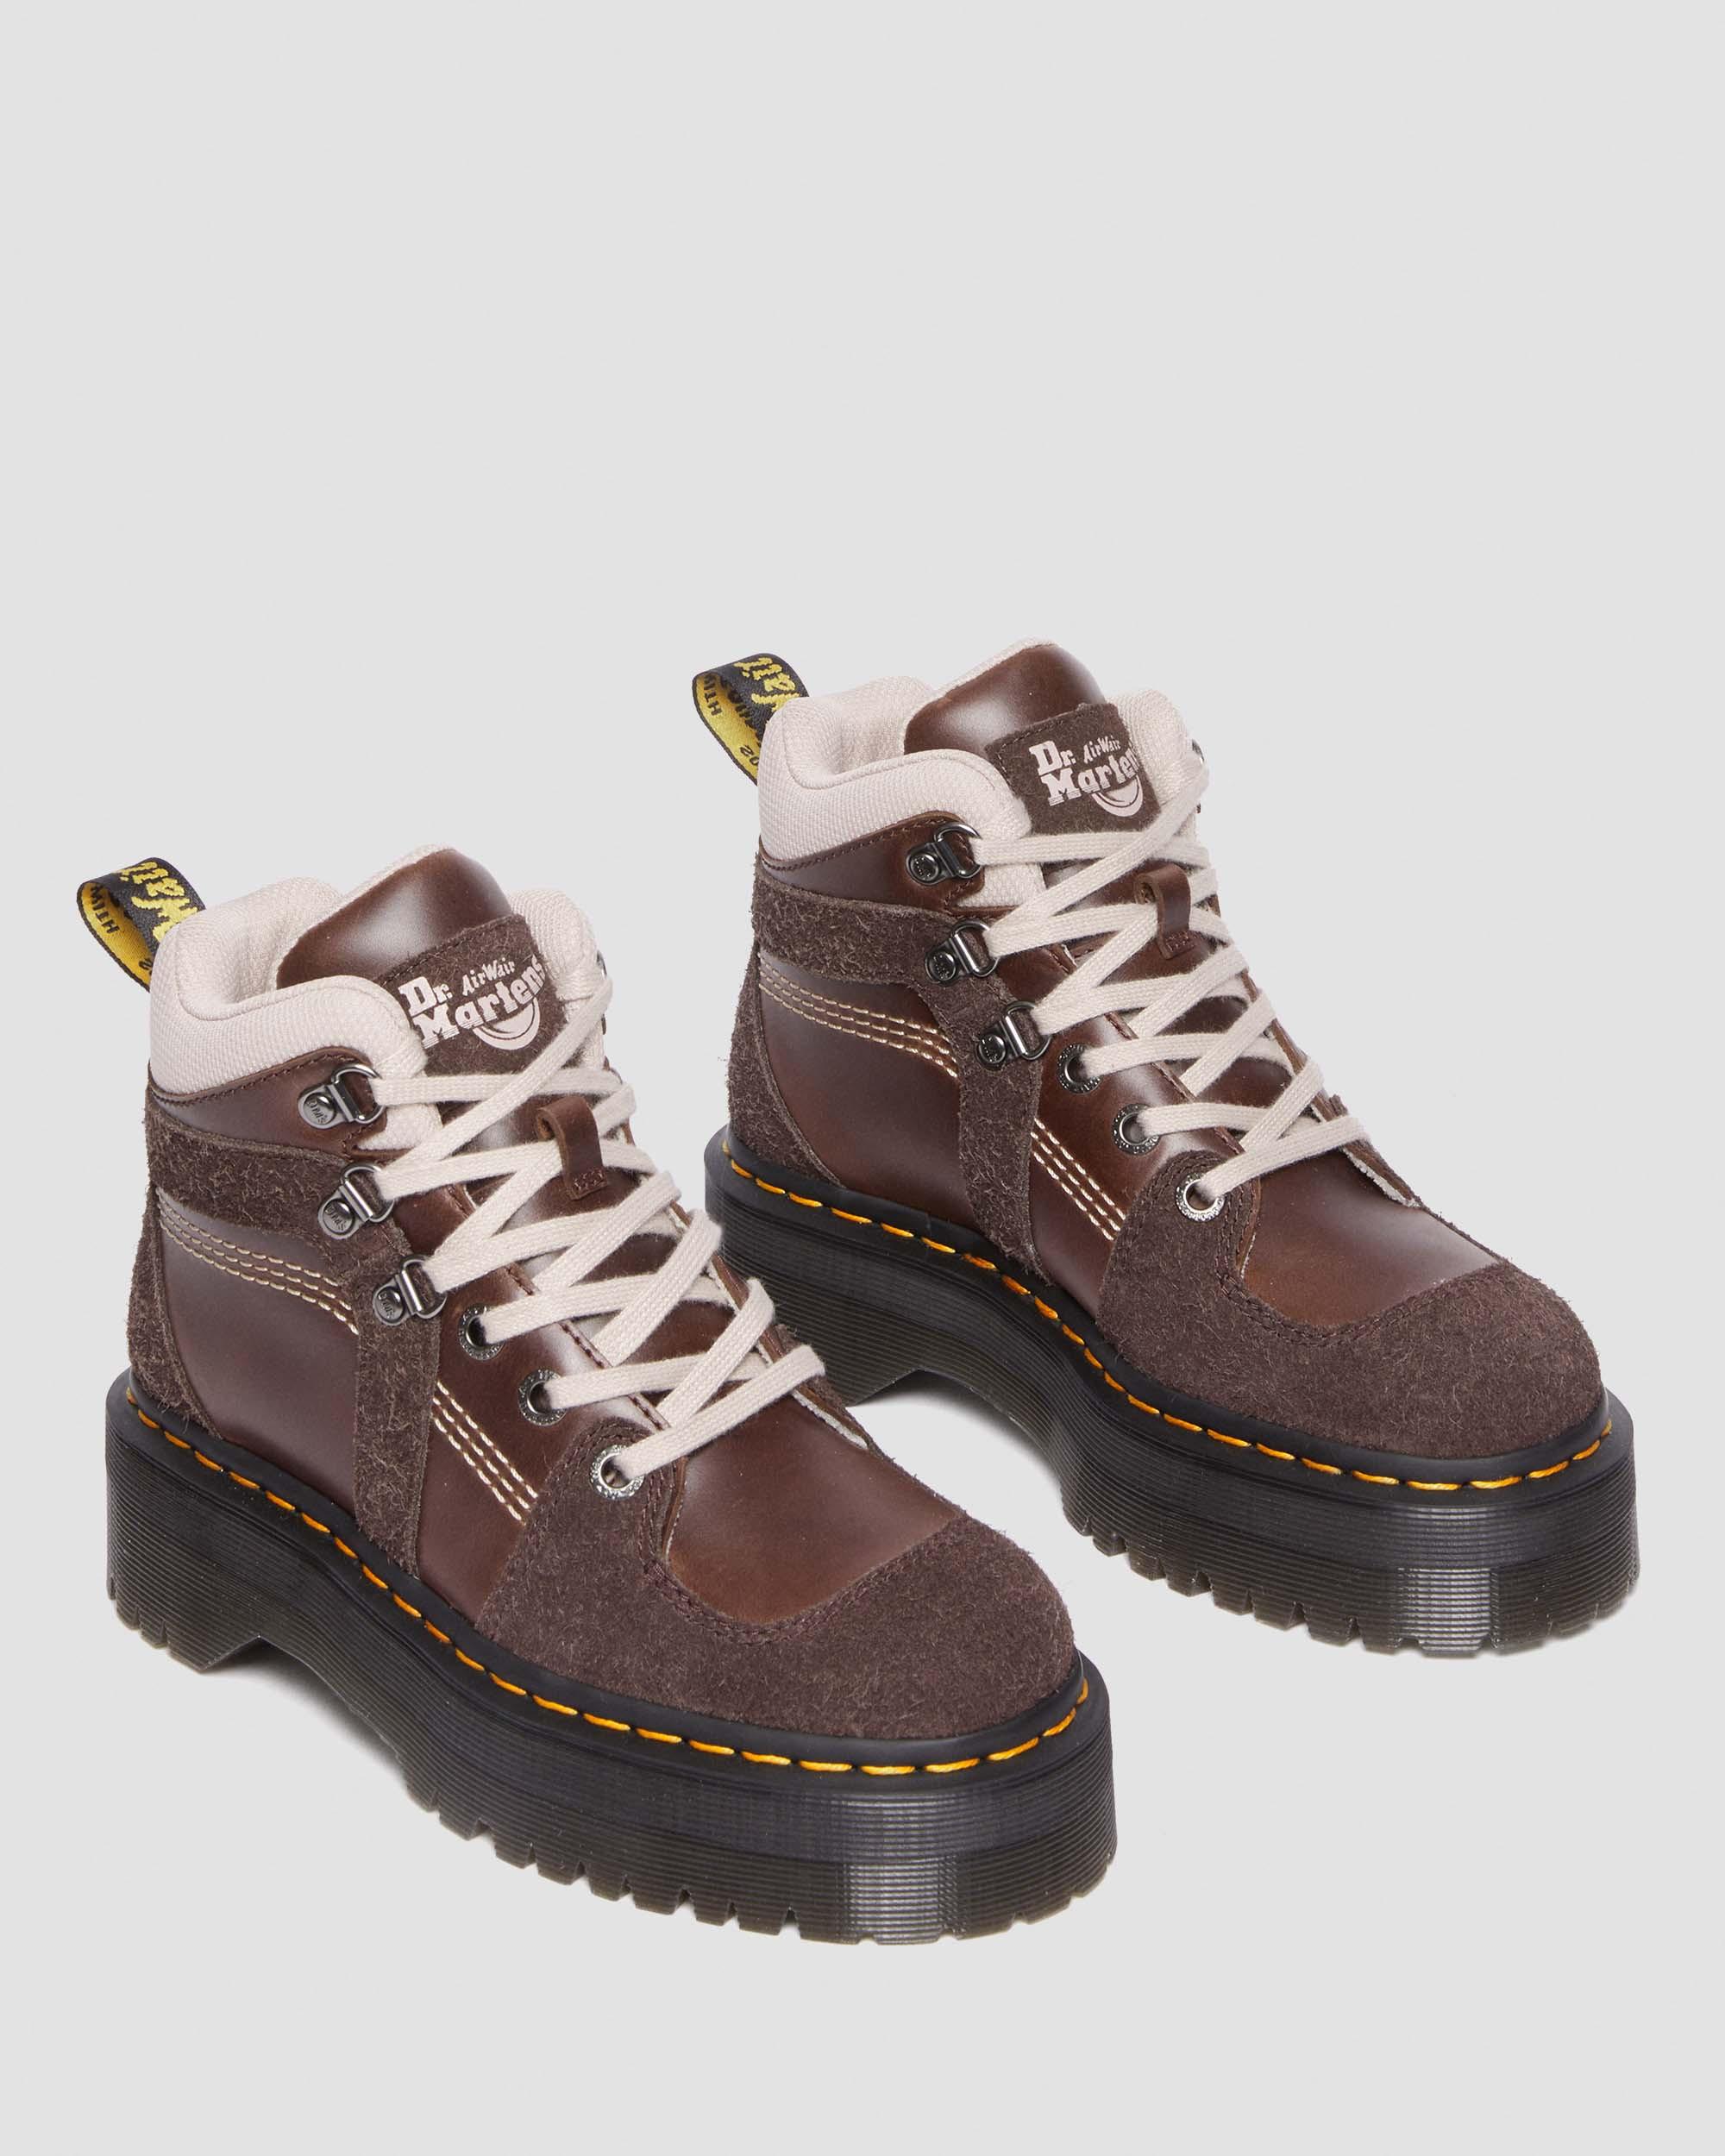 Zuma Leather & Suede Hiker Style Boots in DARK BROWN